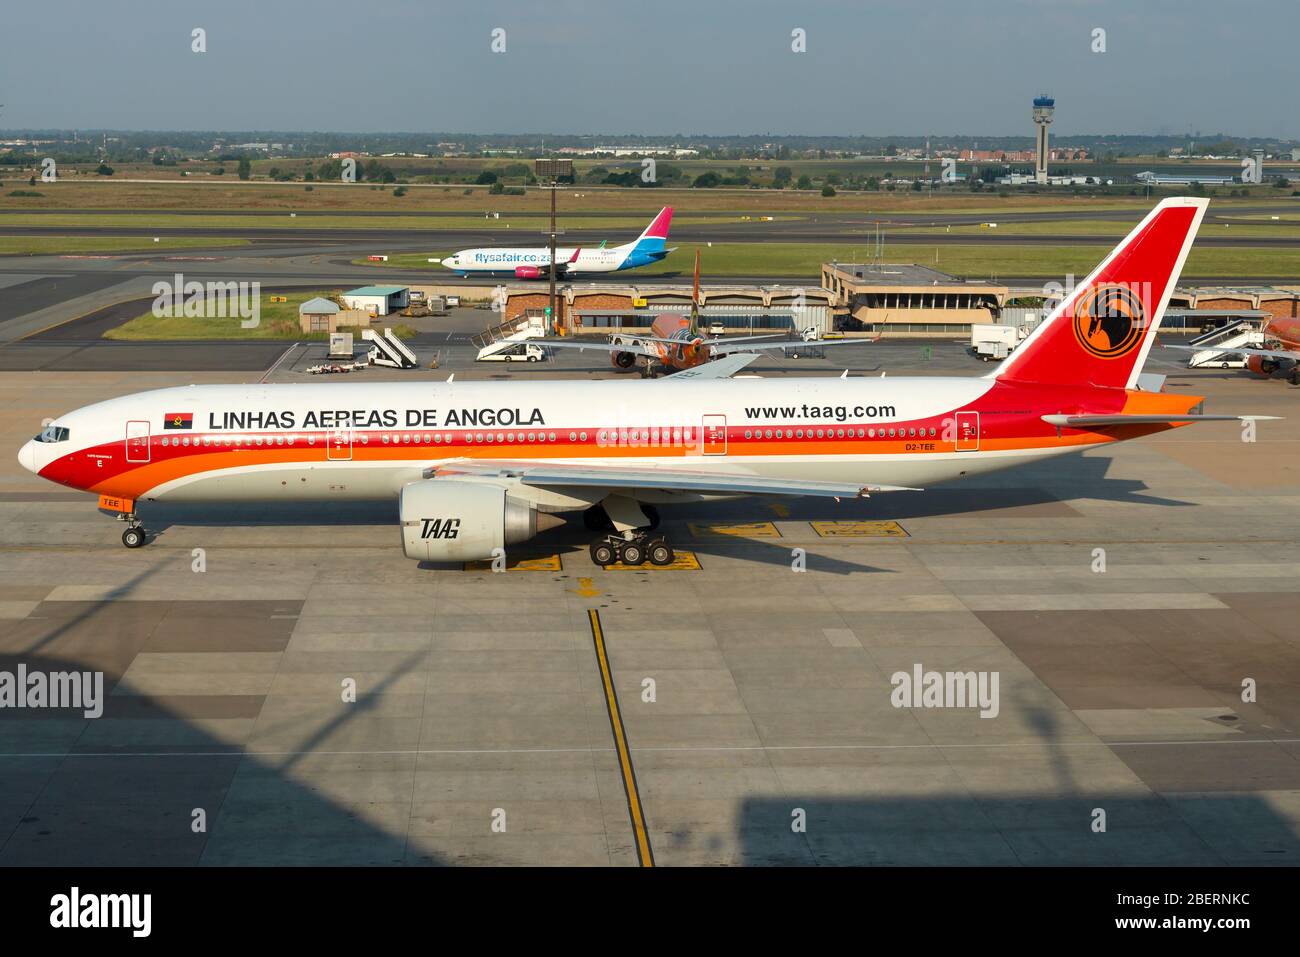 TAAG Angola Airlines Boeing 777 airplane taxiing at OR Tambo Airport in Johannesburg. Angolan aircraft registered as D2-TEE. Stock Photo